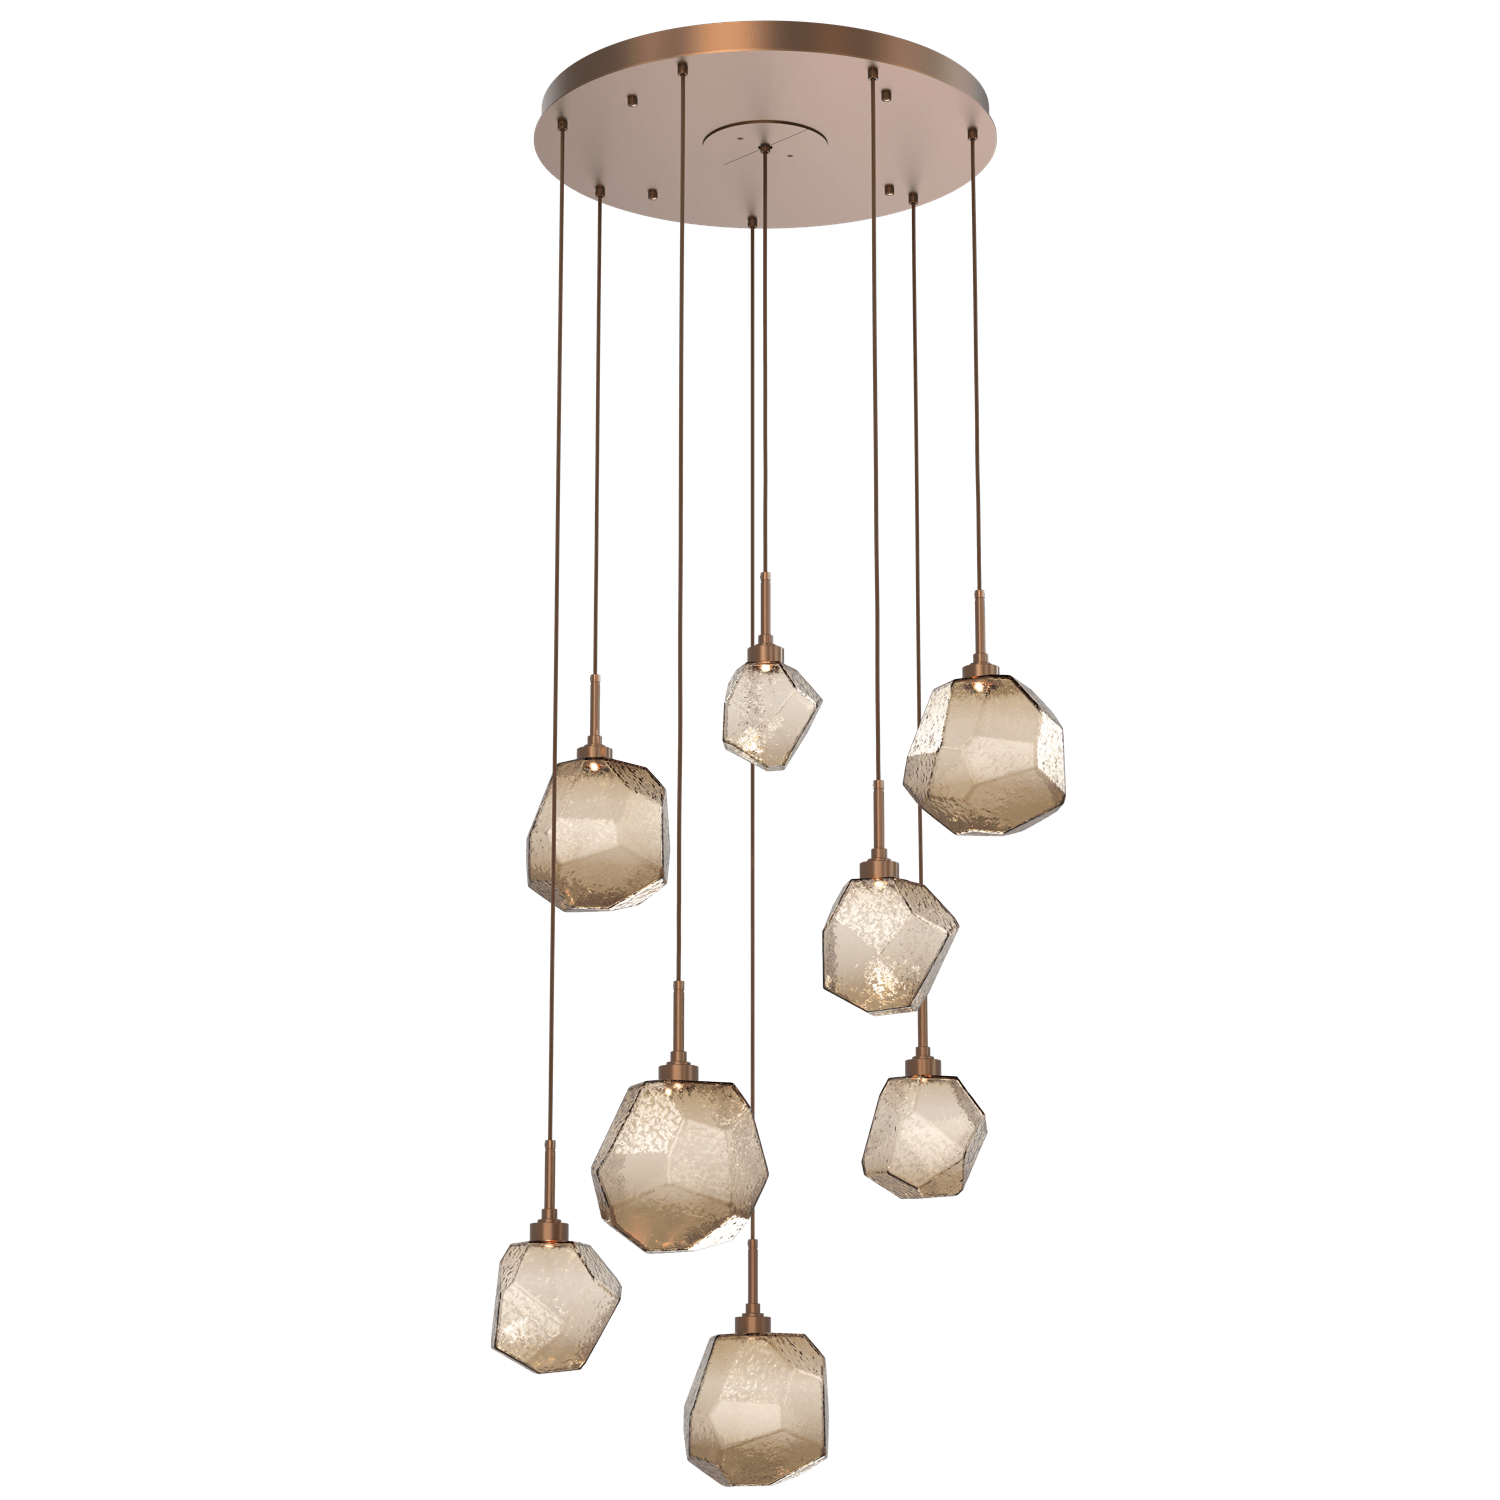 CHB0039-08-BB-B-Hammerton-Studio-Gem-8-light-round-pendant-chandelier-with-burnished-bronze-finish-and-bronze-blown-glass-shades-and-LED-lamping